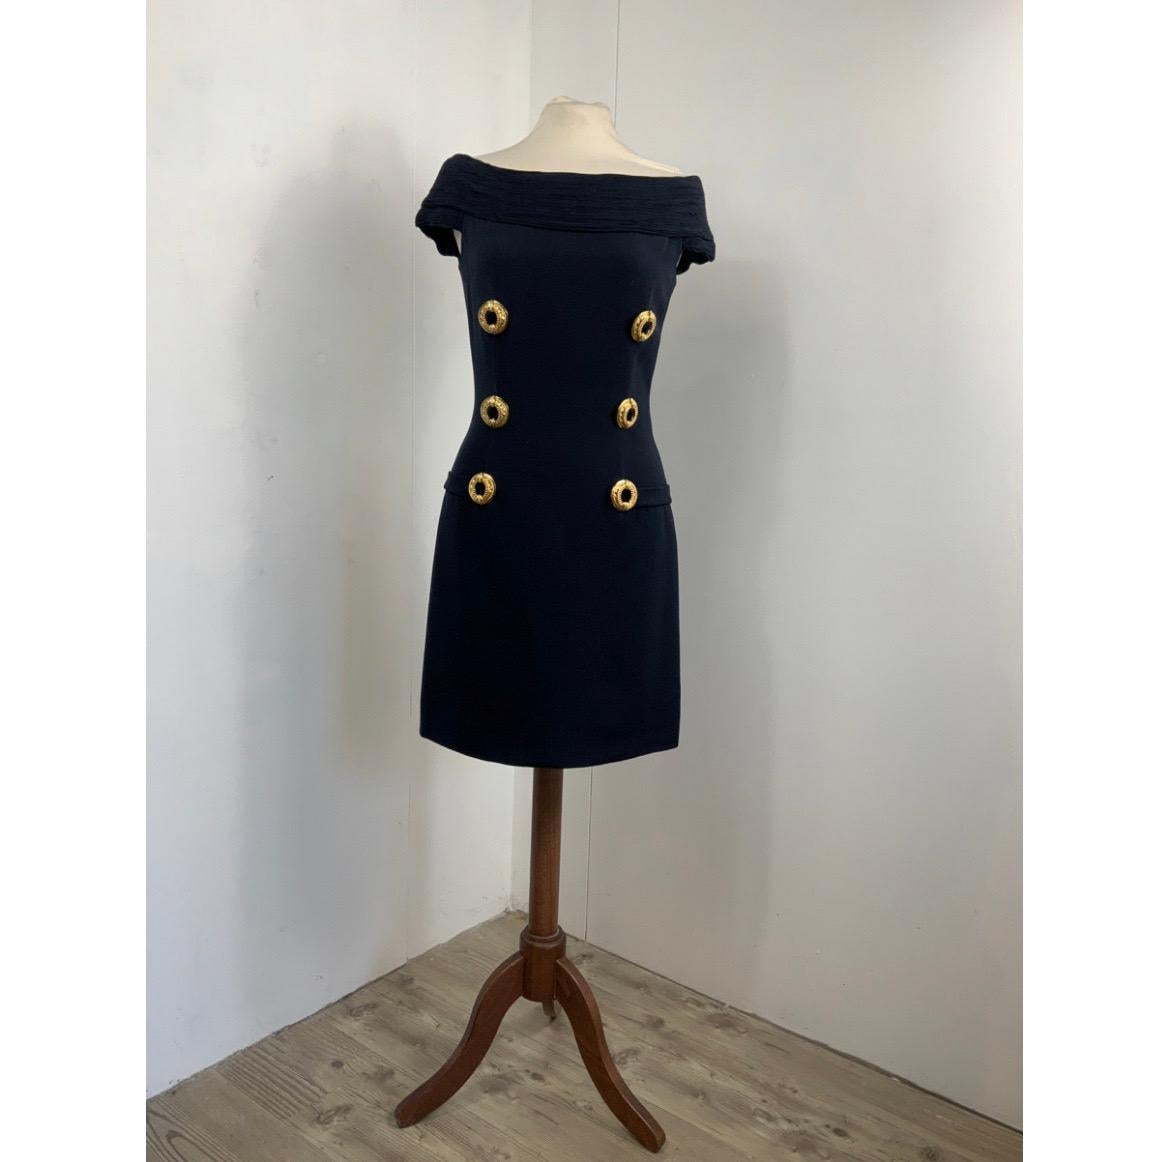 Genny dress.
In navy blue silk. Lined in polyester.
Features fake pockets.
Golden jewel buttons.
Back zip closure.
Italian size 40.
Shoulders 44 cm
Bust 40cm
Length 85 cm
In good general condition, it shows signs of normal use